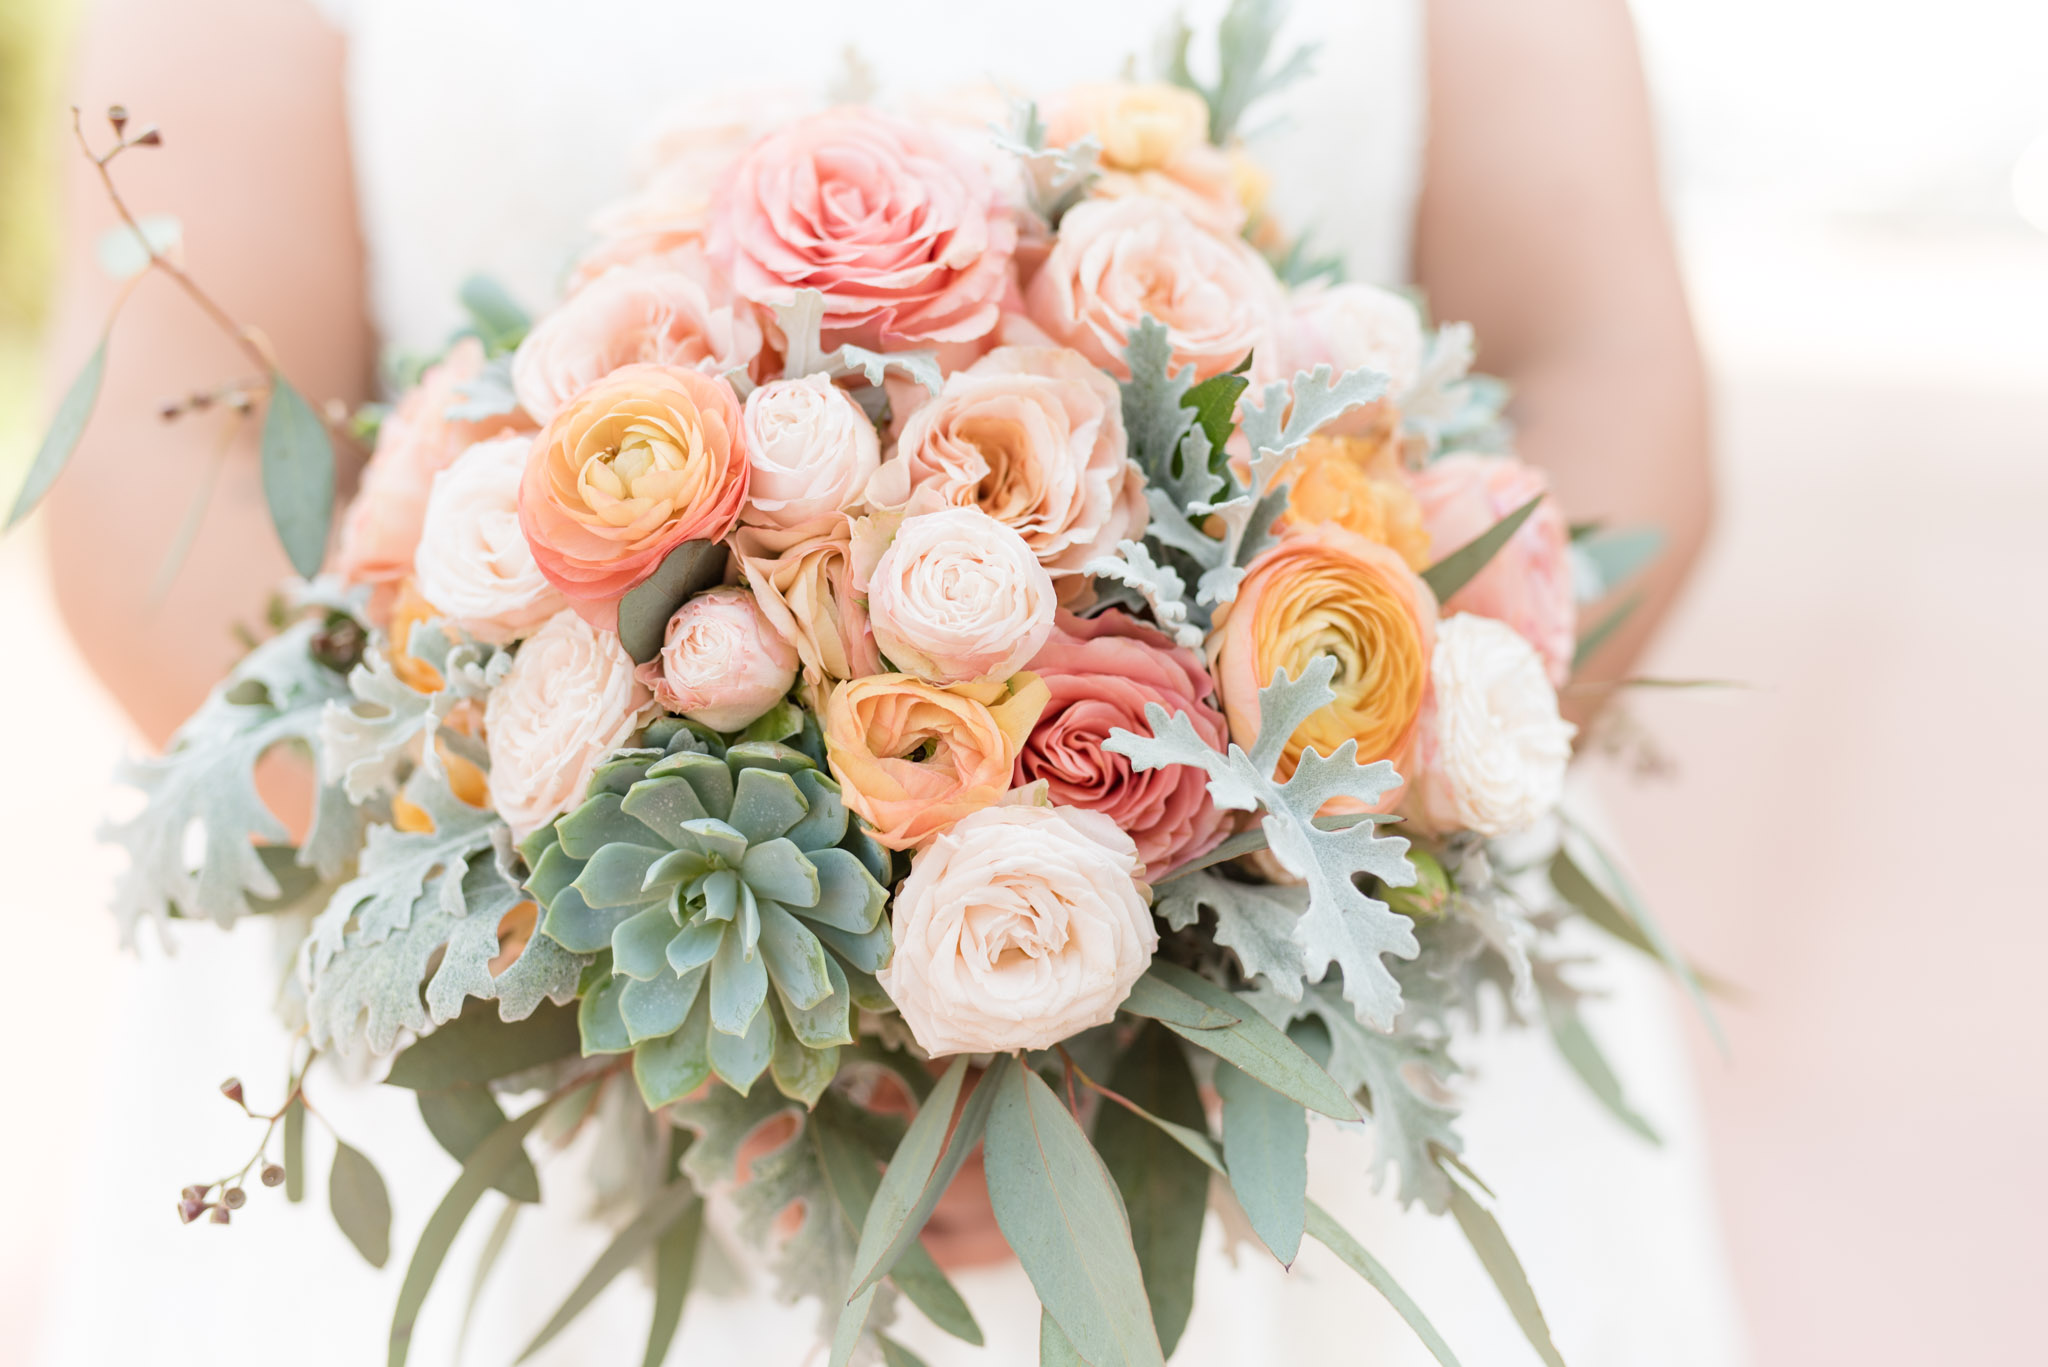 Wedding bouquet with ranunculus, succulents, and roses.